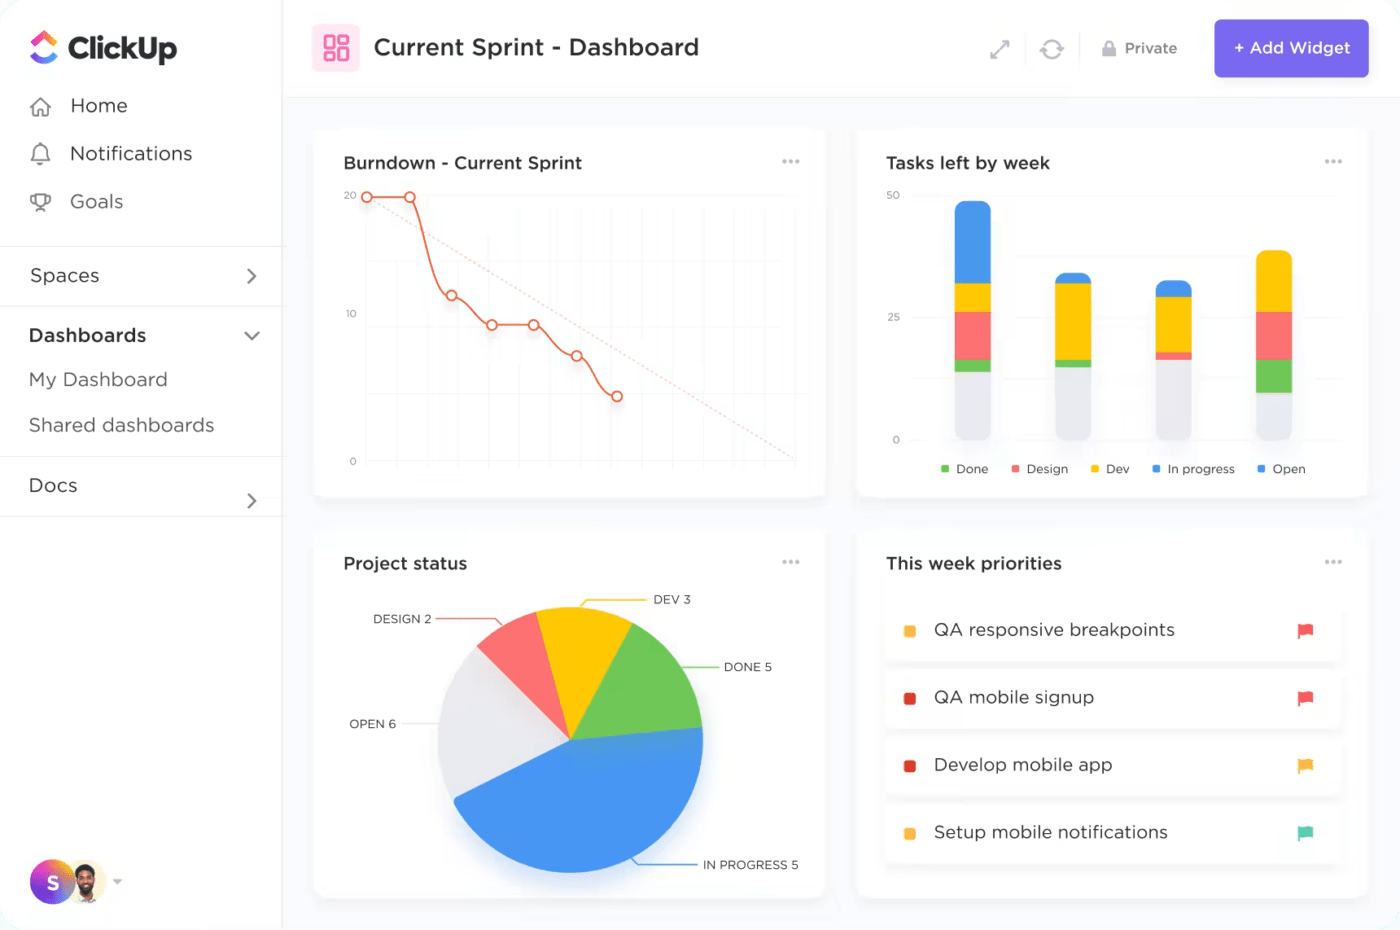 Tracking and monitoring tasks, resources, and project progress in ClickUp Dashboard view